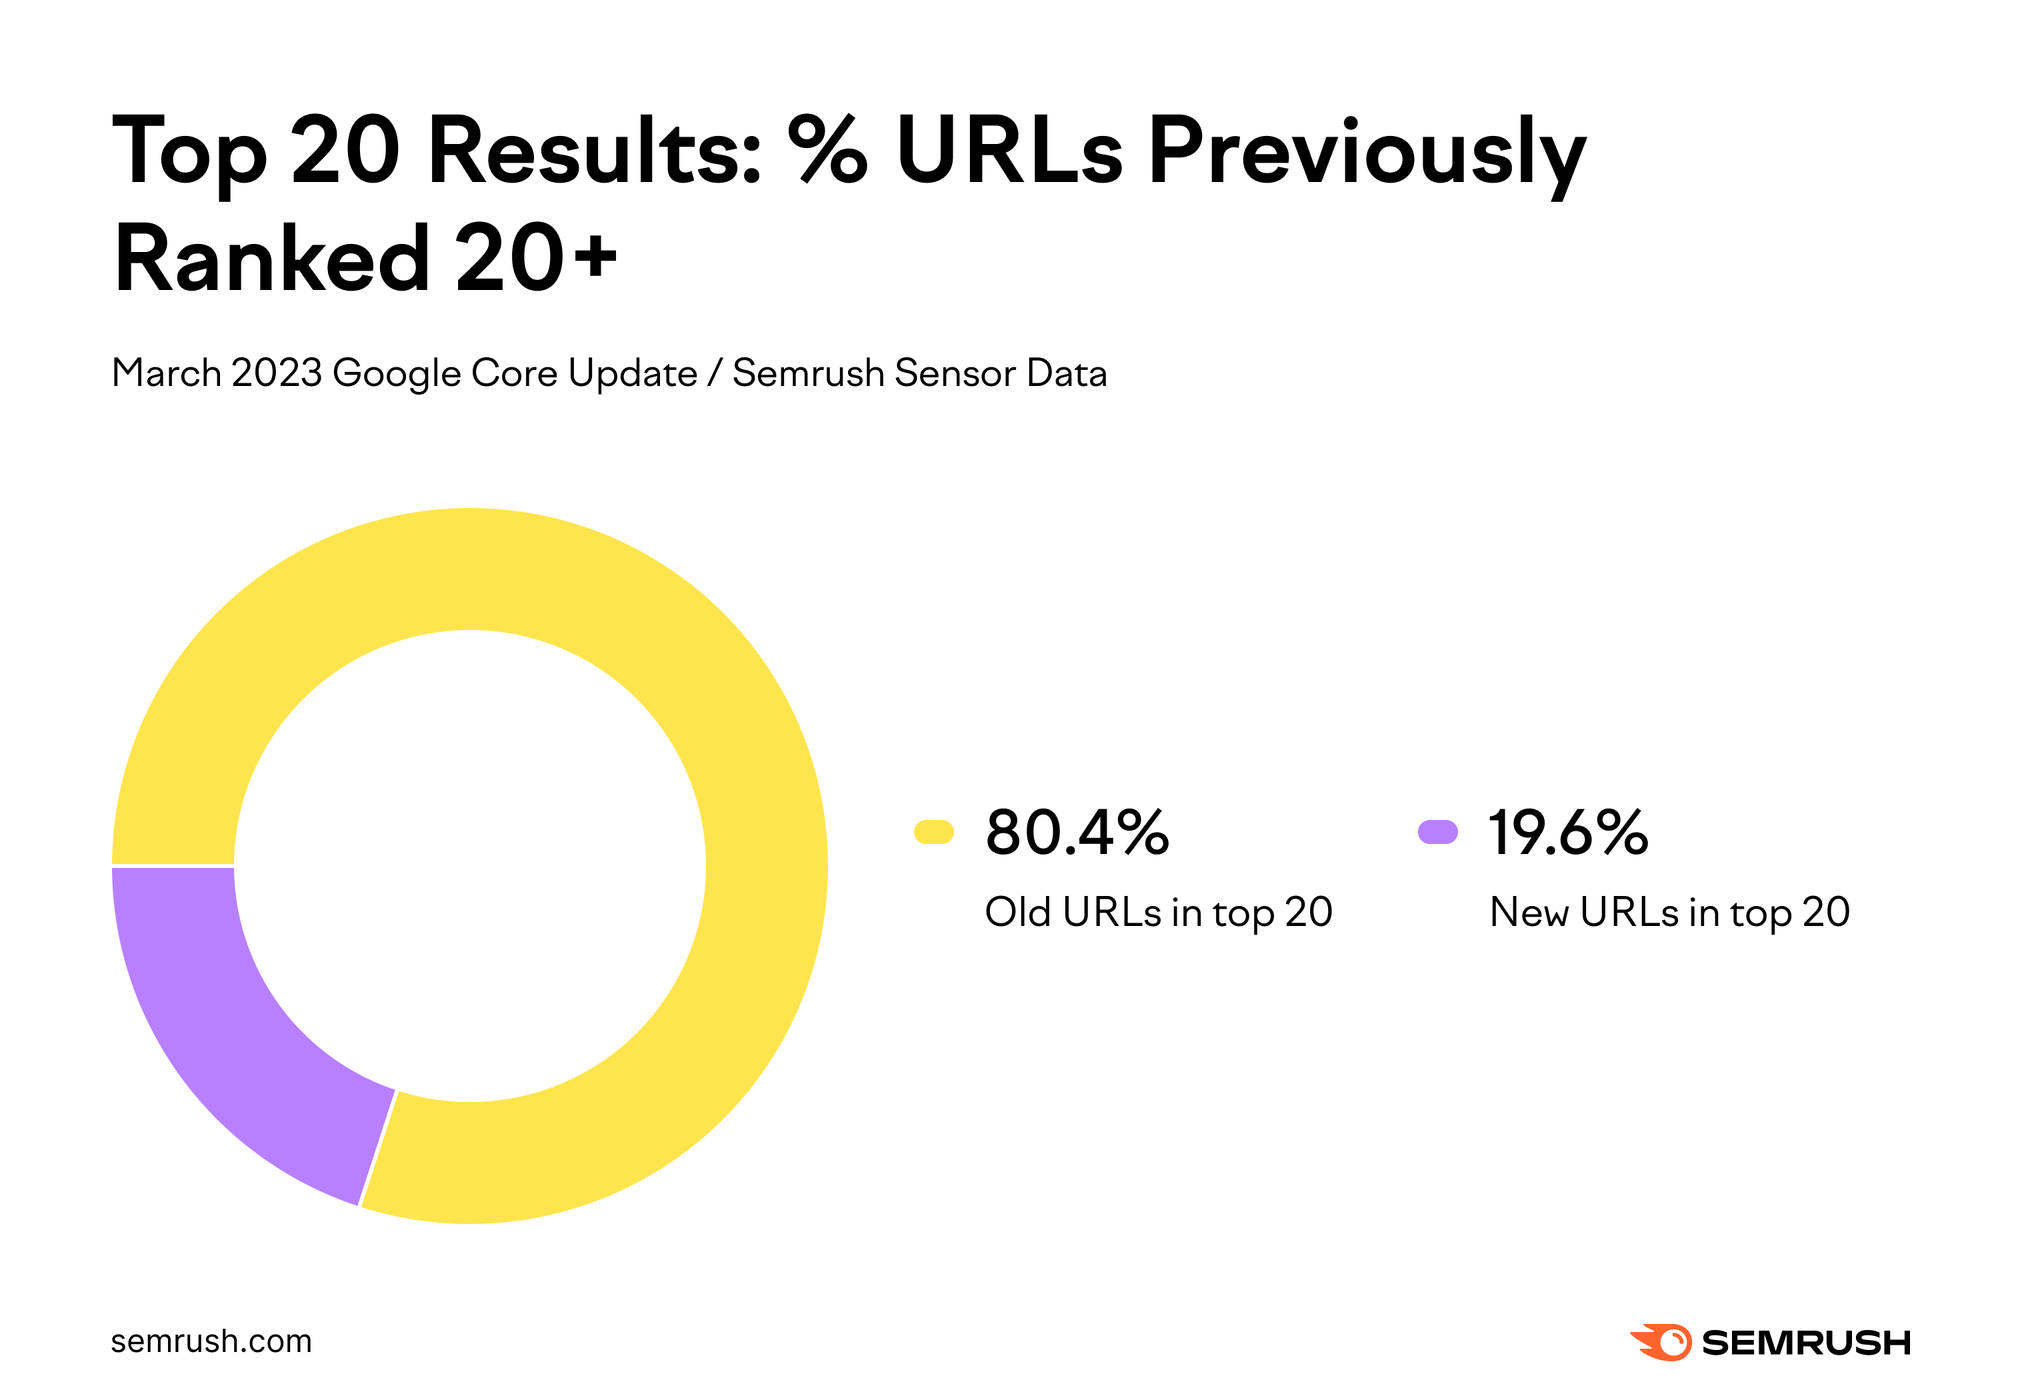 Graph showing the percentage of URLs that previously ranked 20 or above that moved to the top 20 during the March 2023 core update.